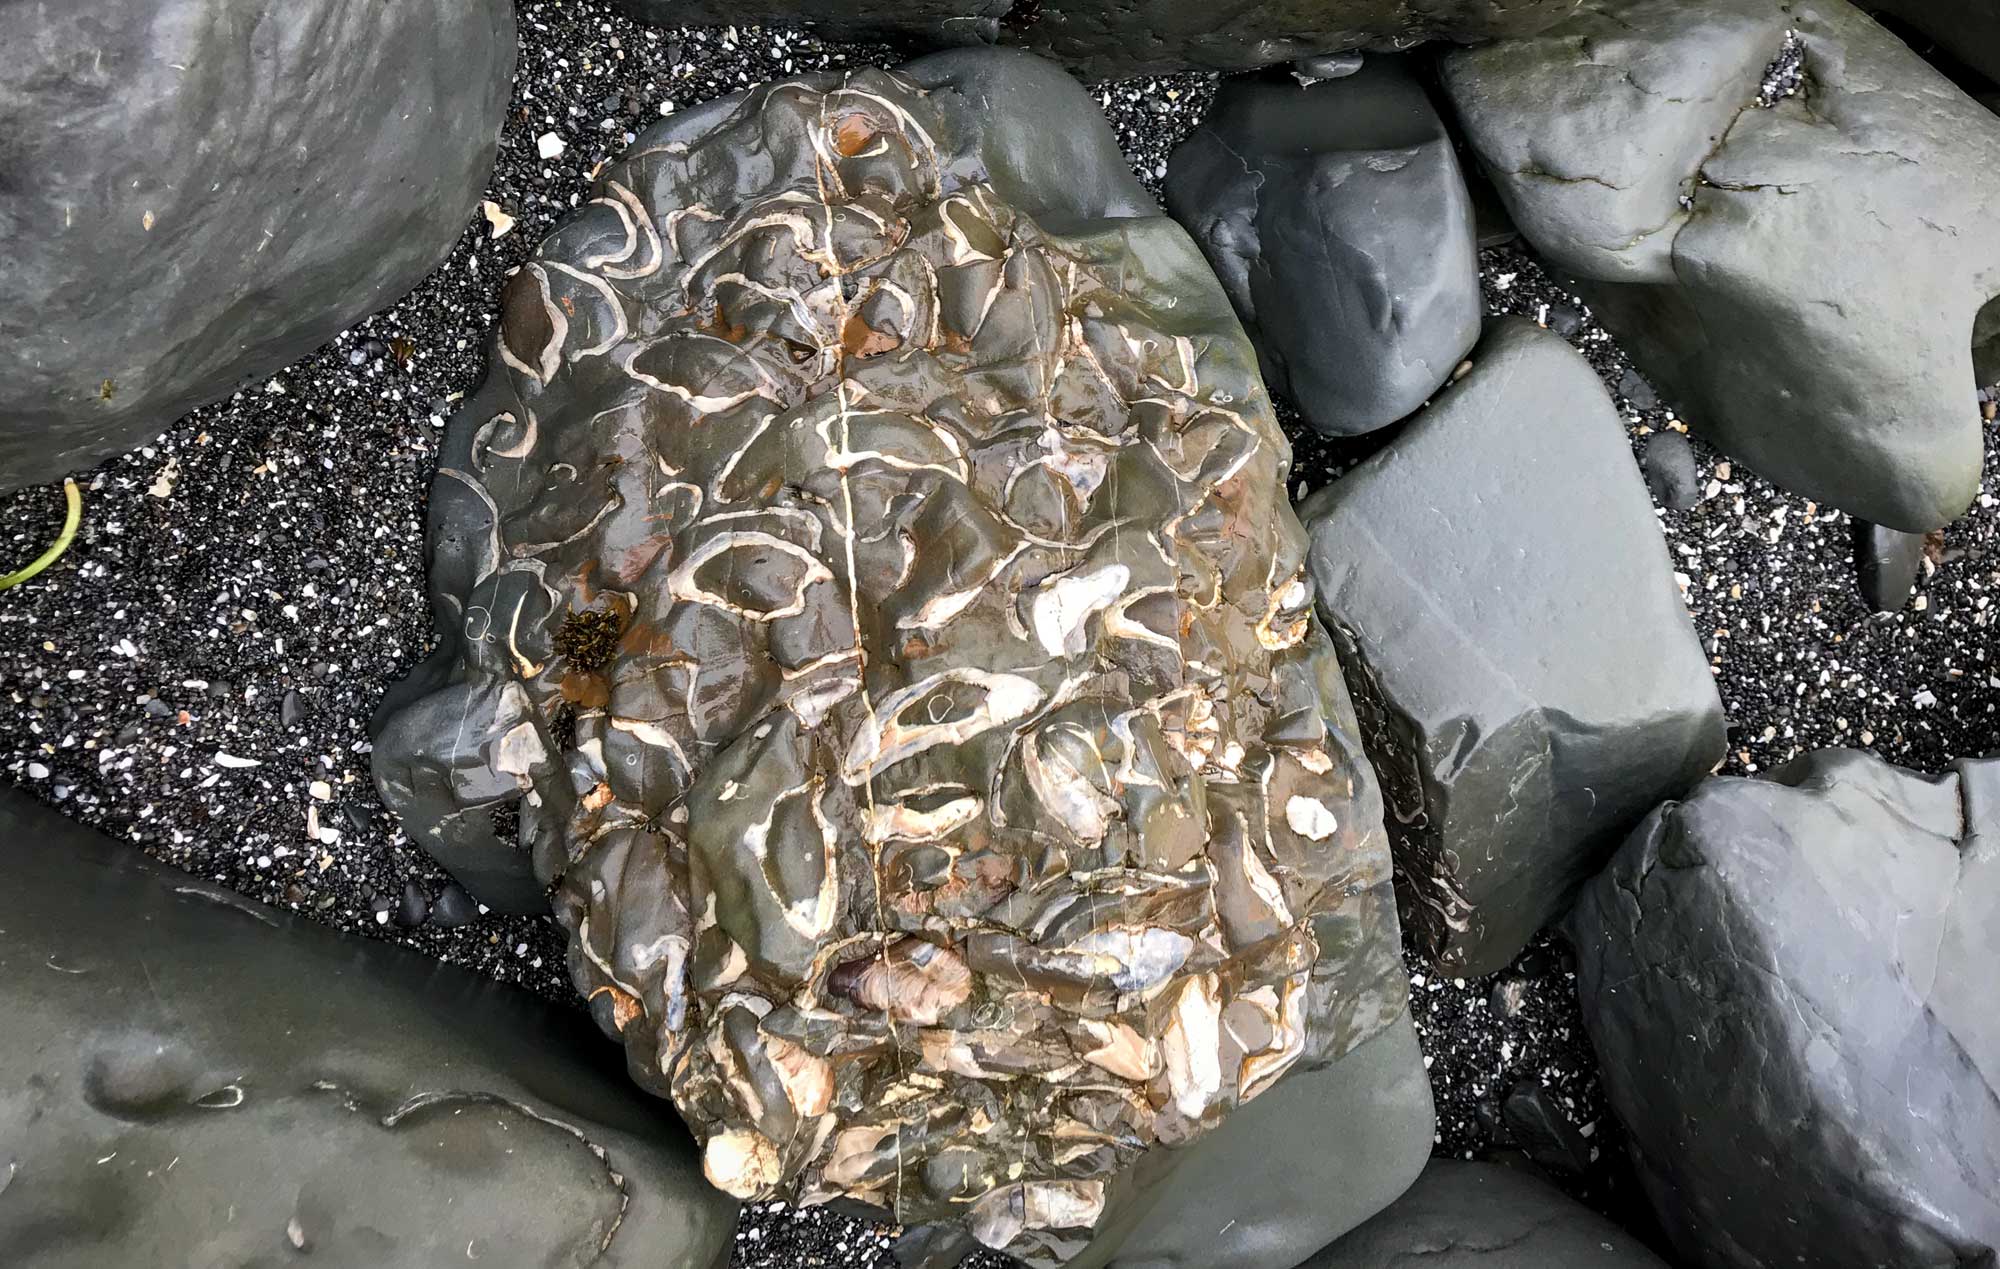 Photograph of large gray rock on a beach with numerous white bivalve shells embedded in its surface. 